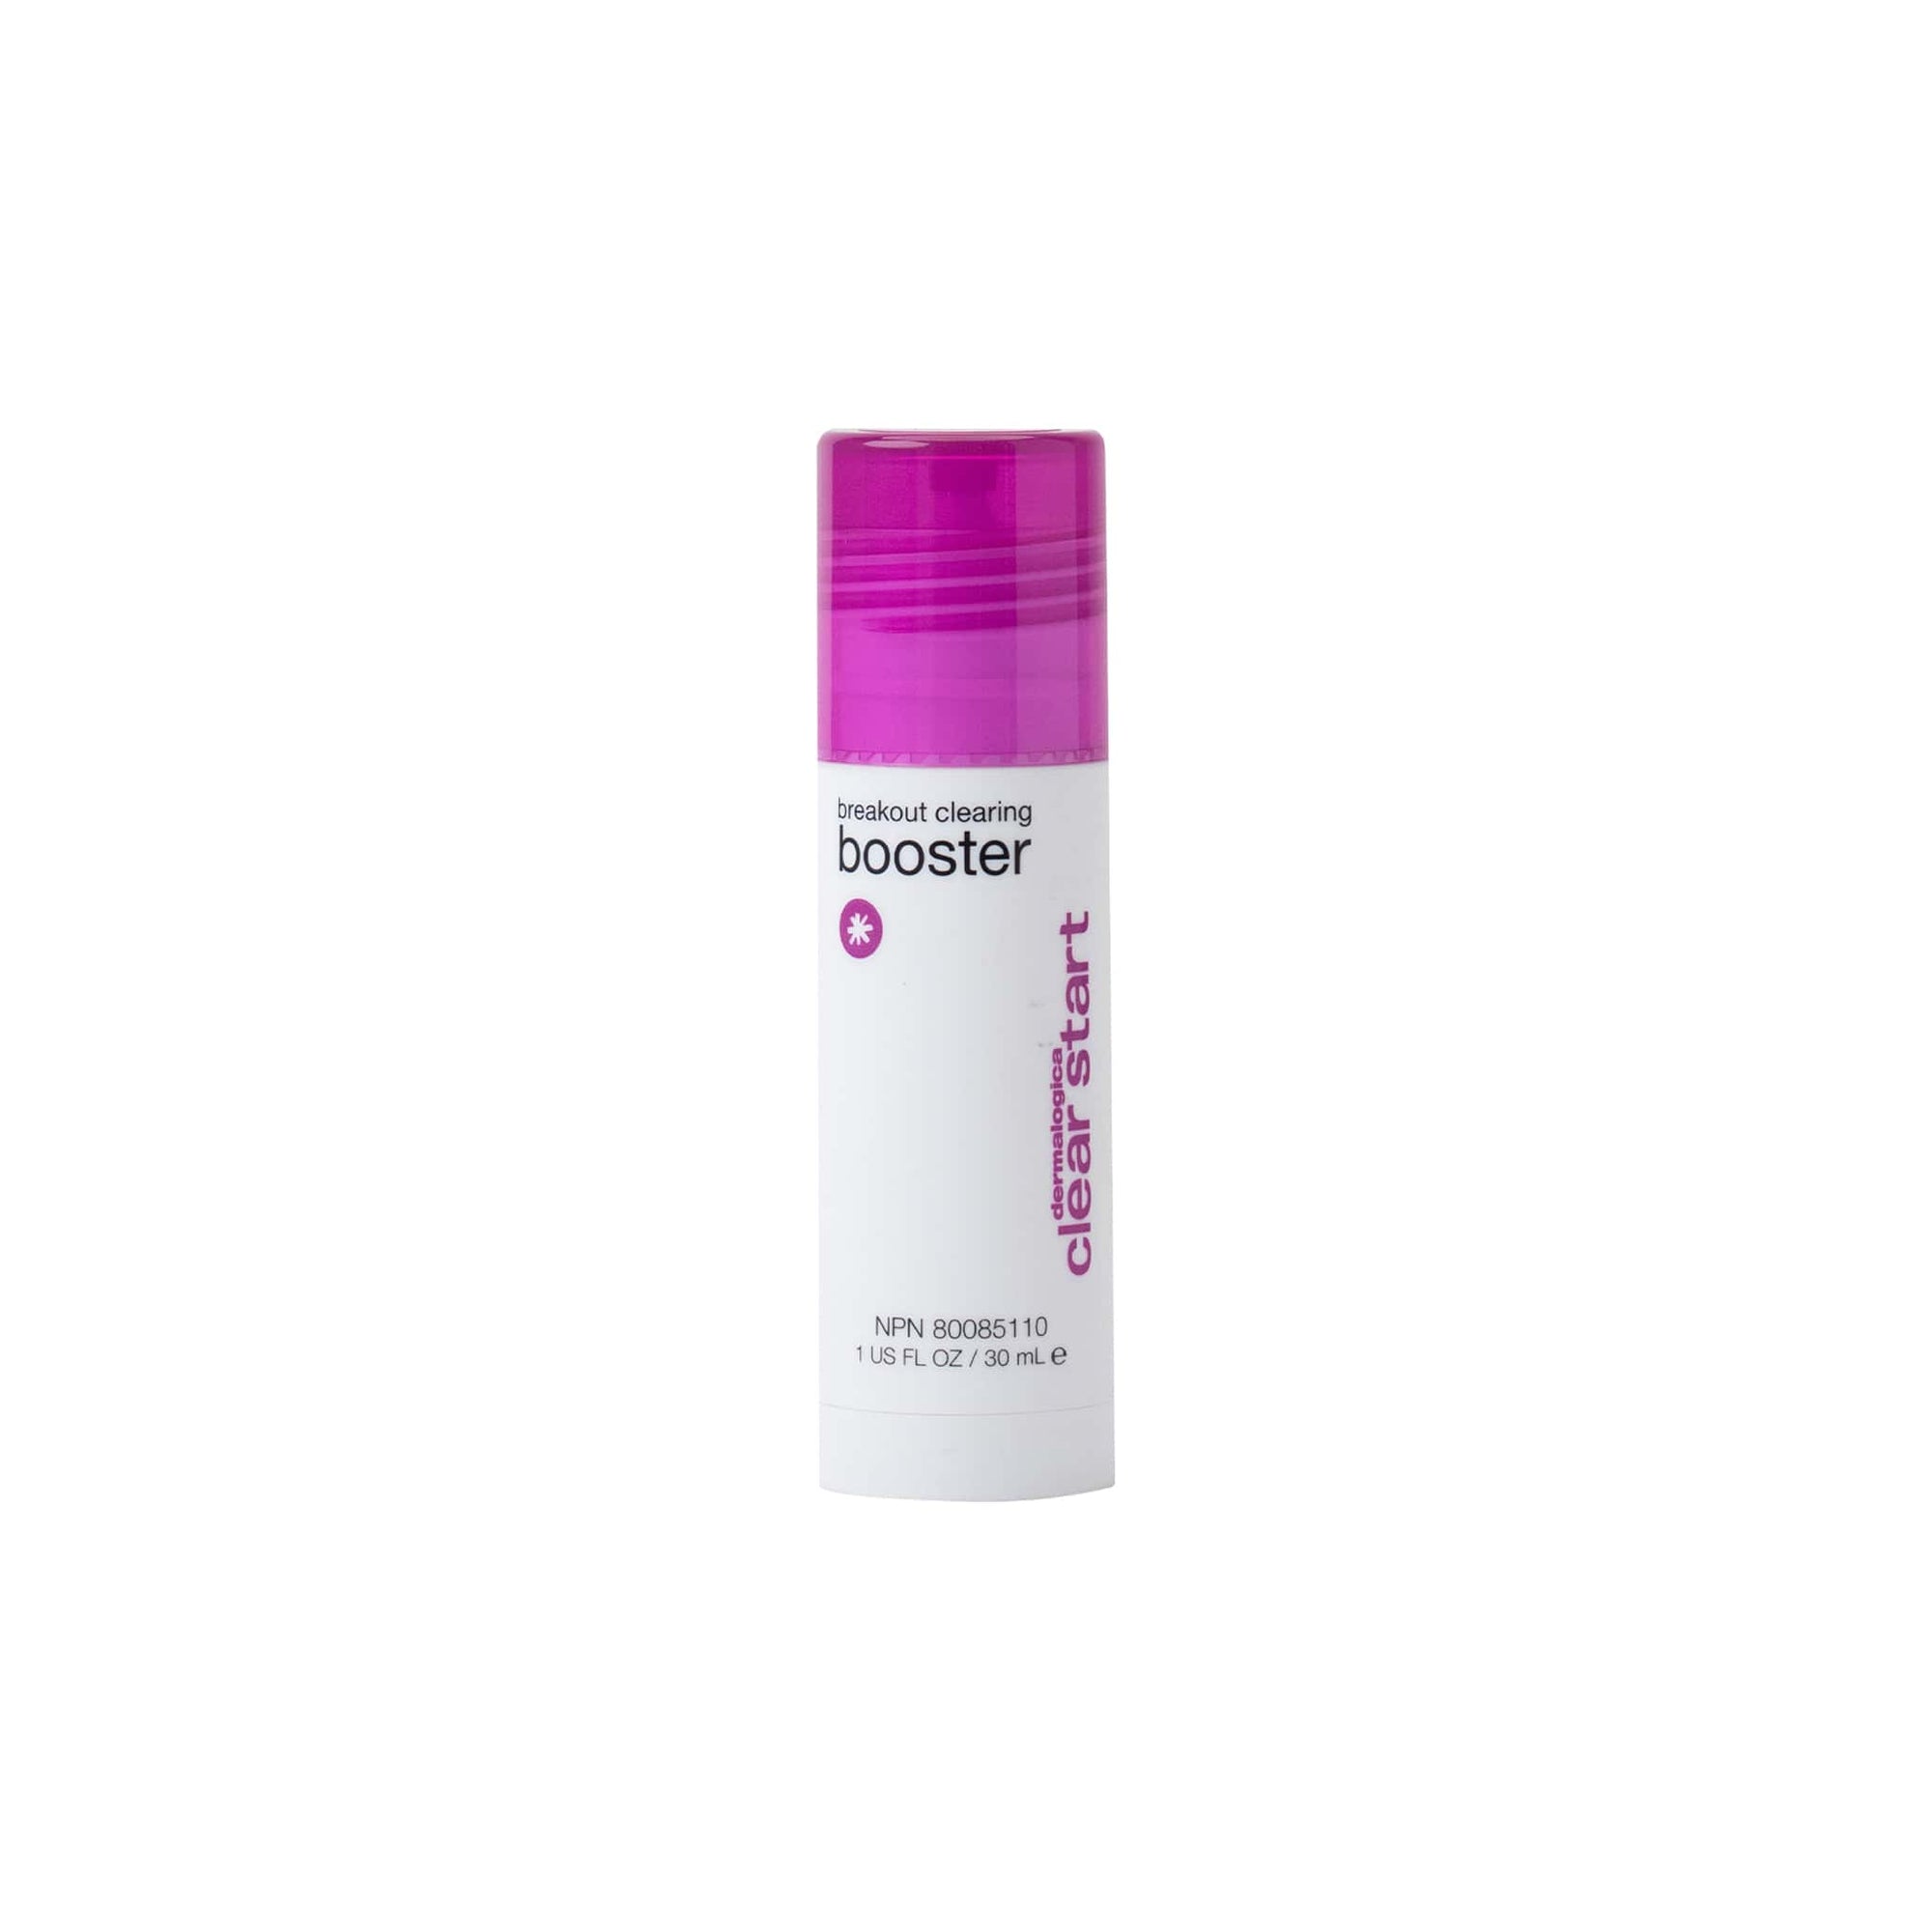 Dermalogica Breakout Clearing Booster | Retail Box